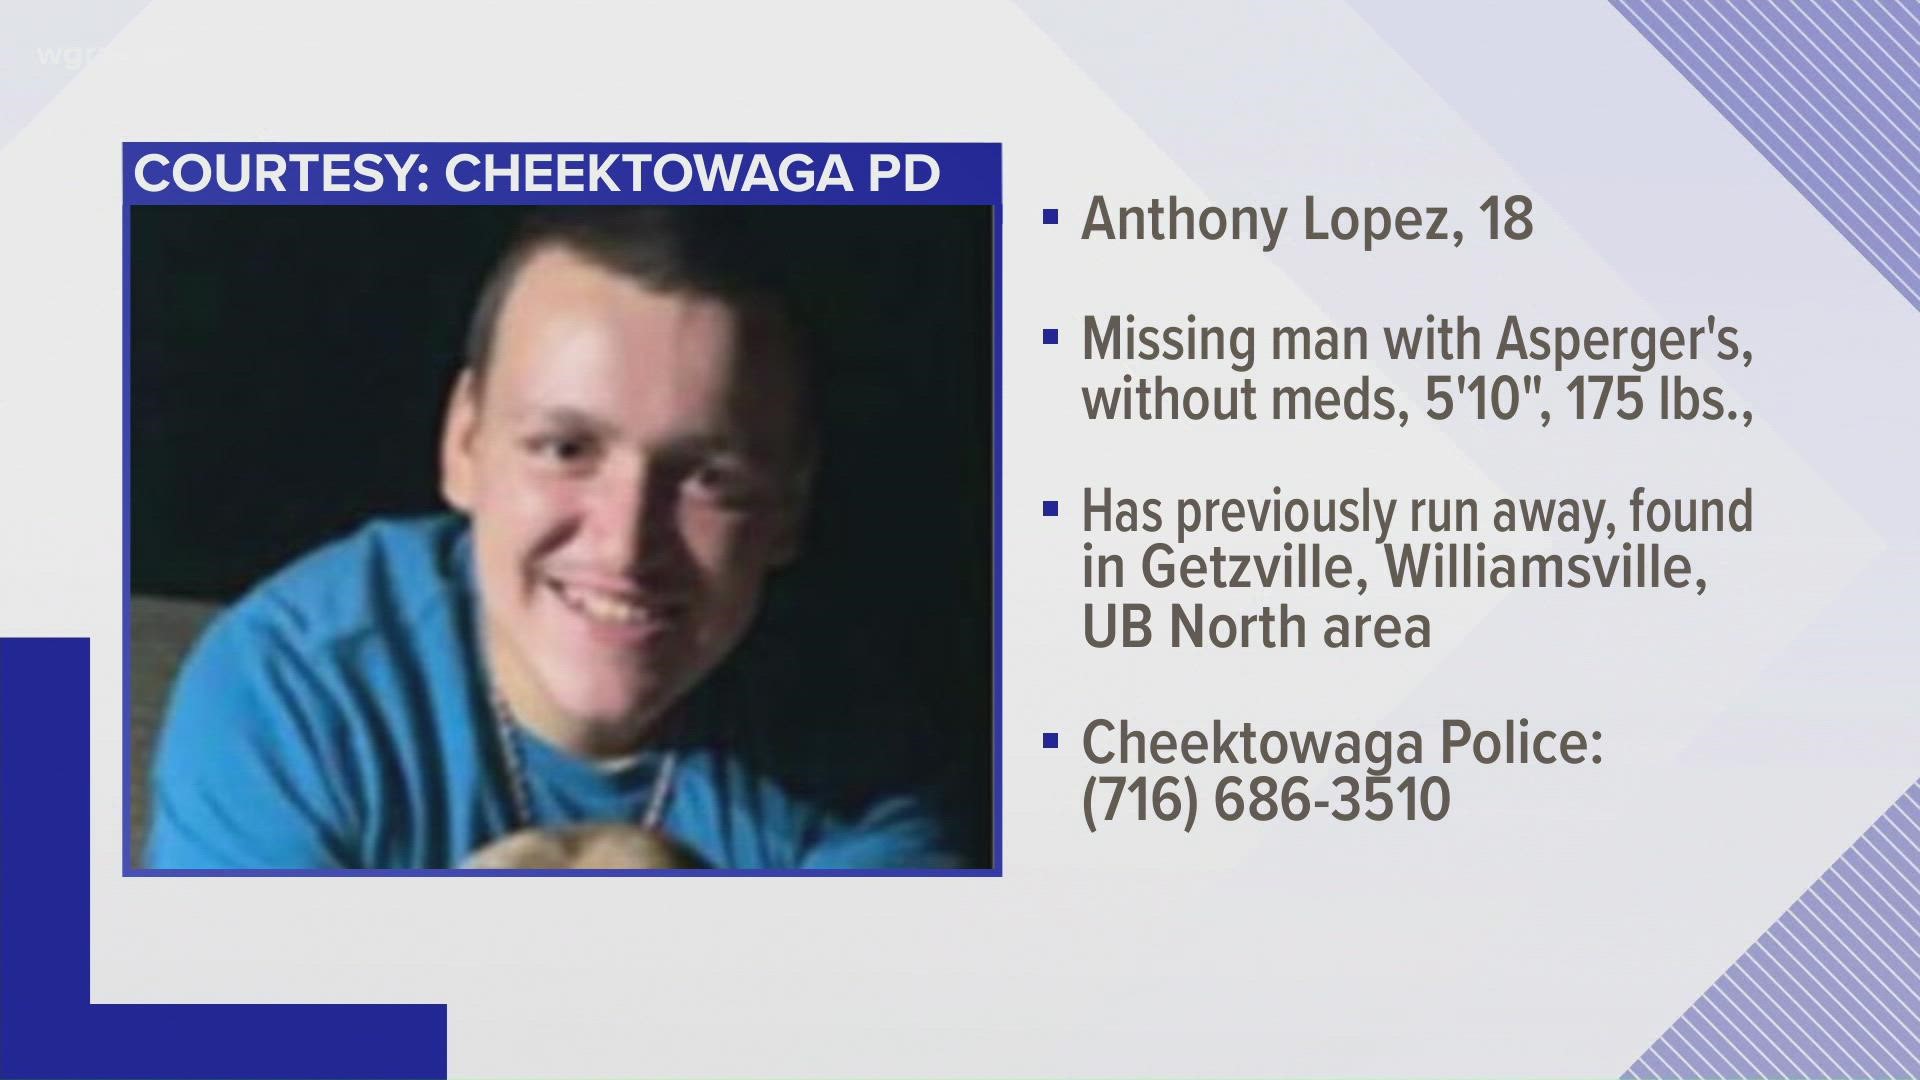 Cheektowaga police are still looking for missing 18-year-old Anthony Lopez.